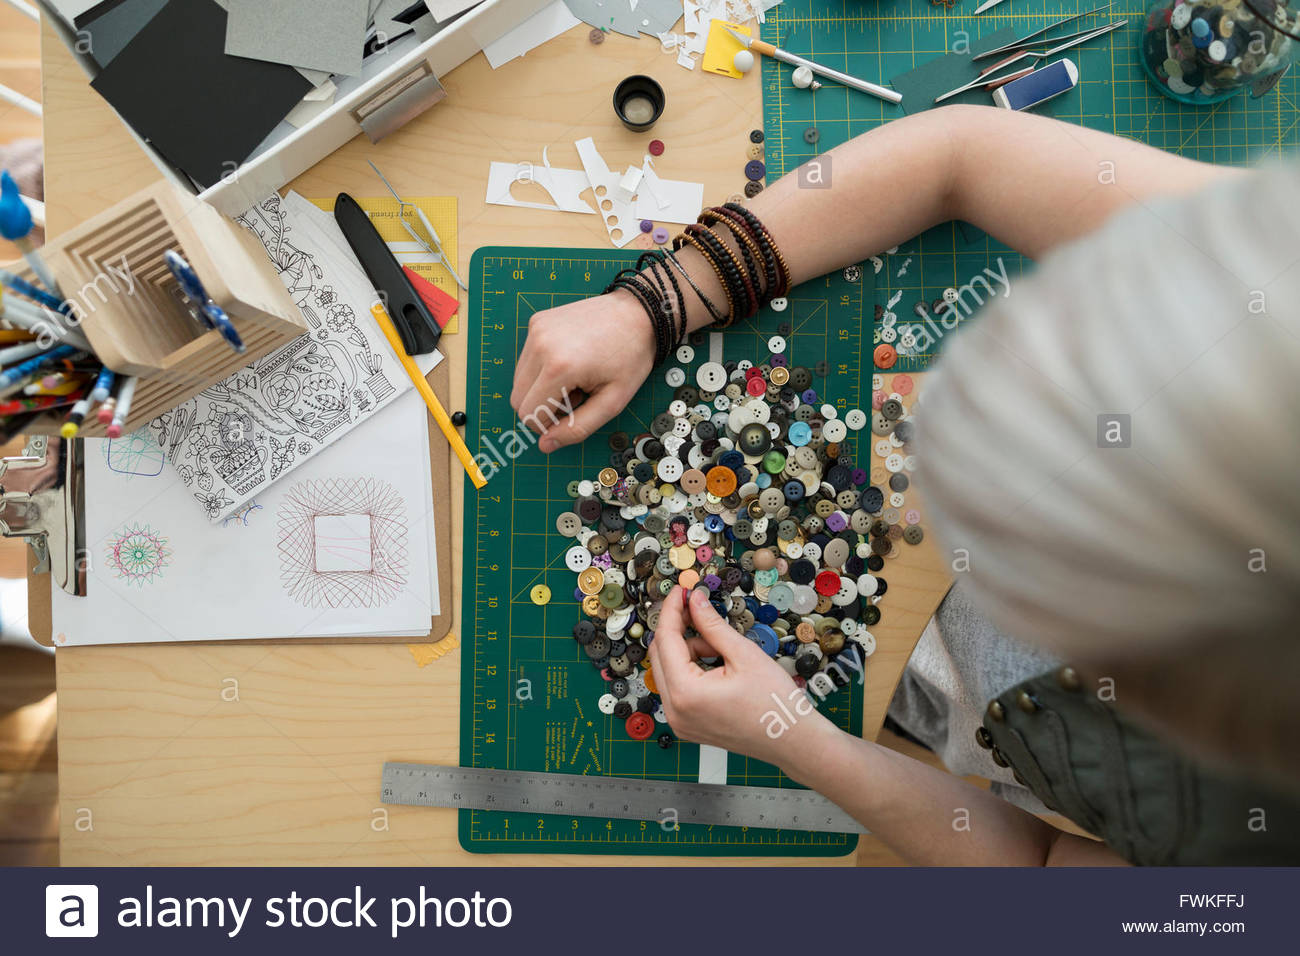 Overhead view craftswoman sorting buttons at desk Stock Photo